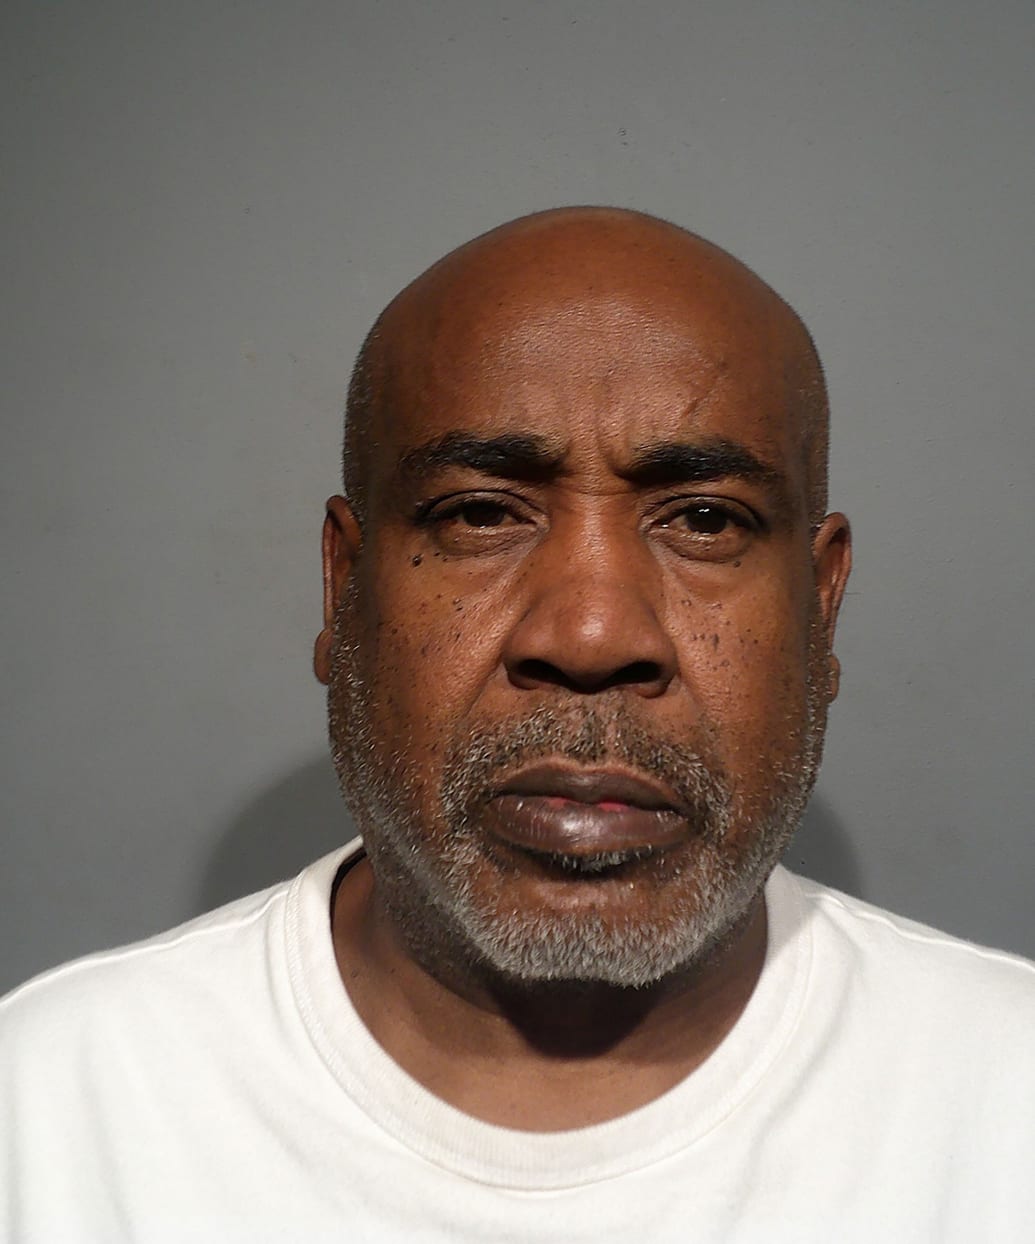 Duane “Keffe D” Davis arrested on Friday in connection with 1996 shooting death of Tupac Shakur